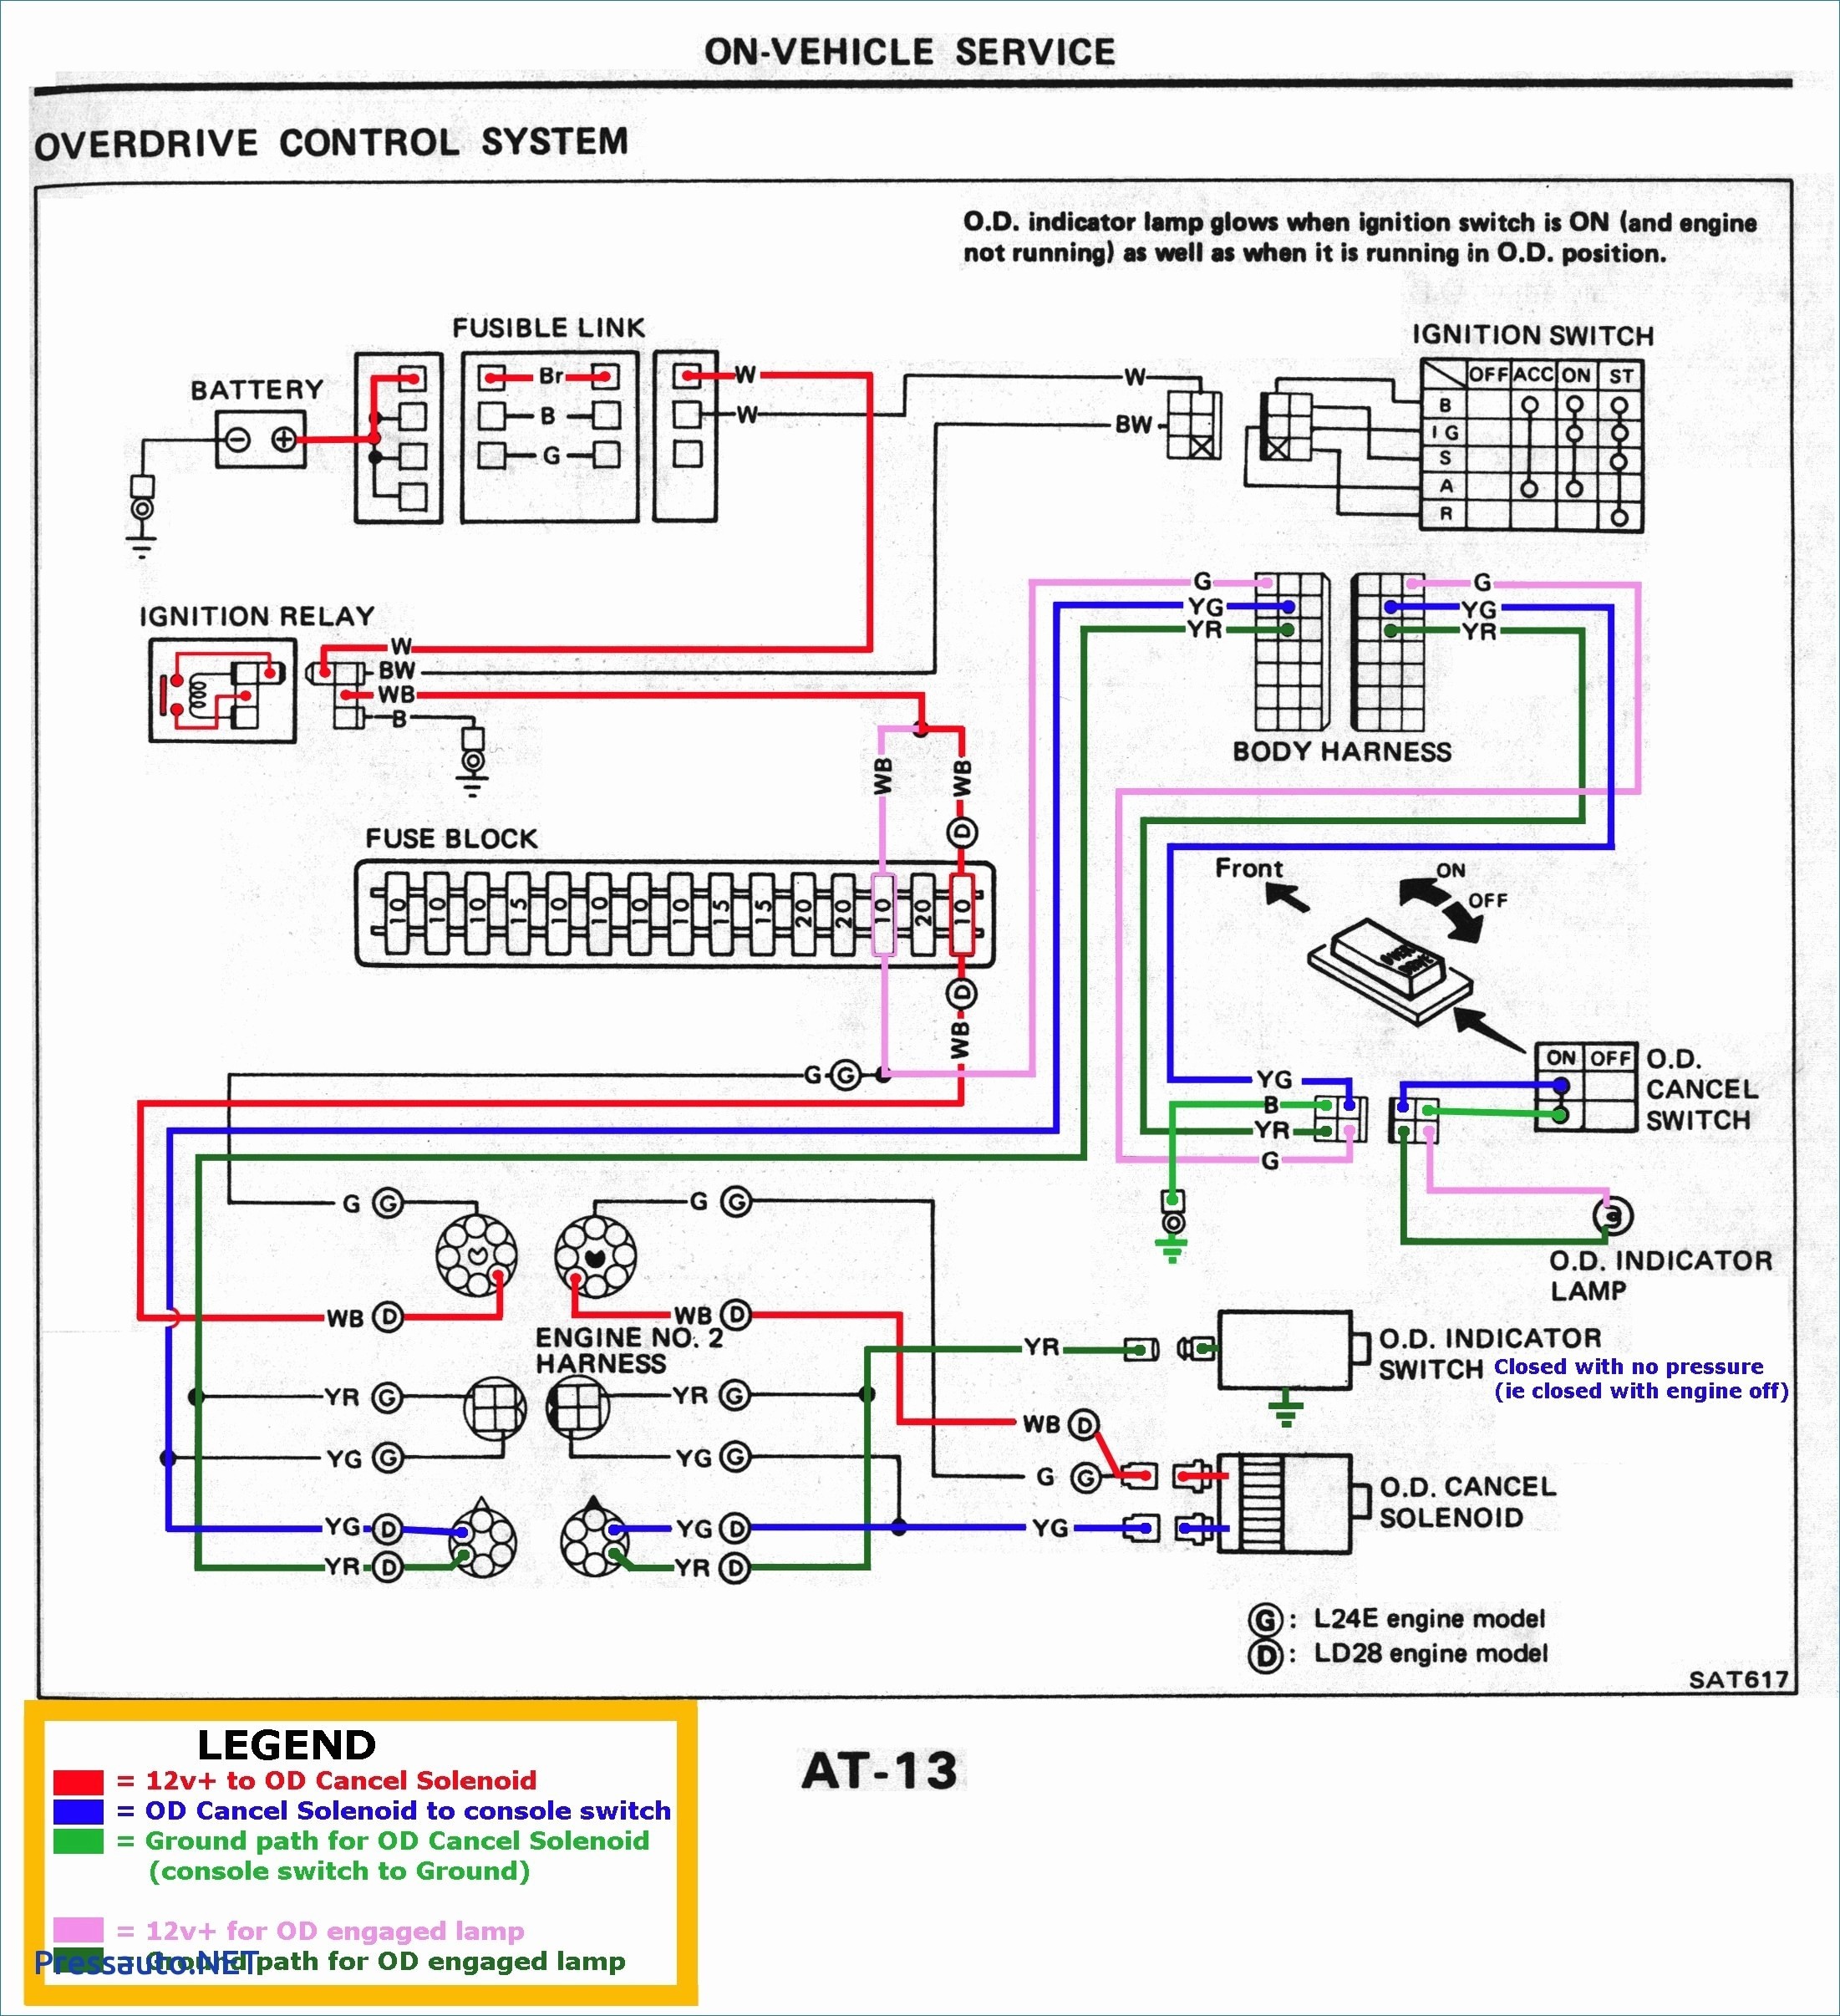 Wiring Diagram for Ignition Switch New Wiring Diagram Lawn Mower Ignition Switch Wiring Diagram Beautiful